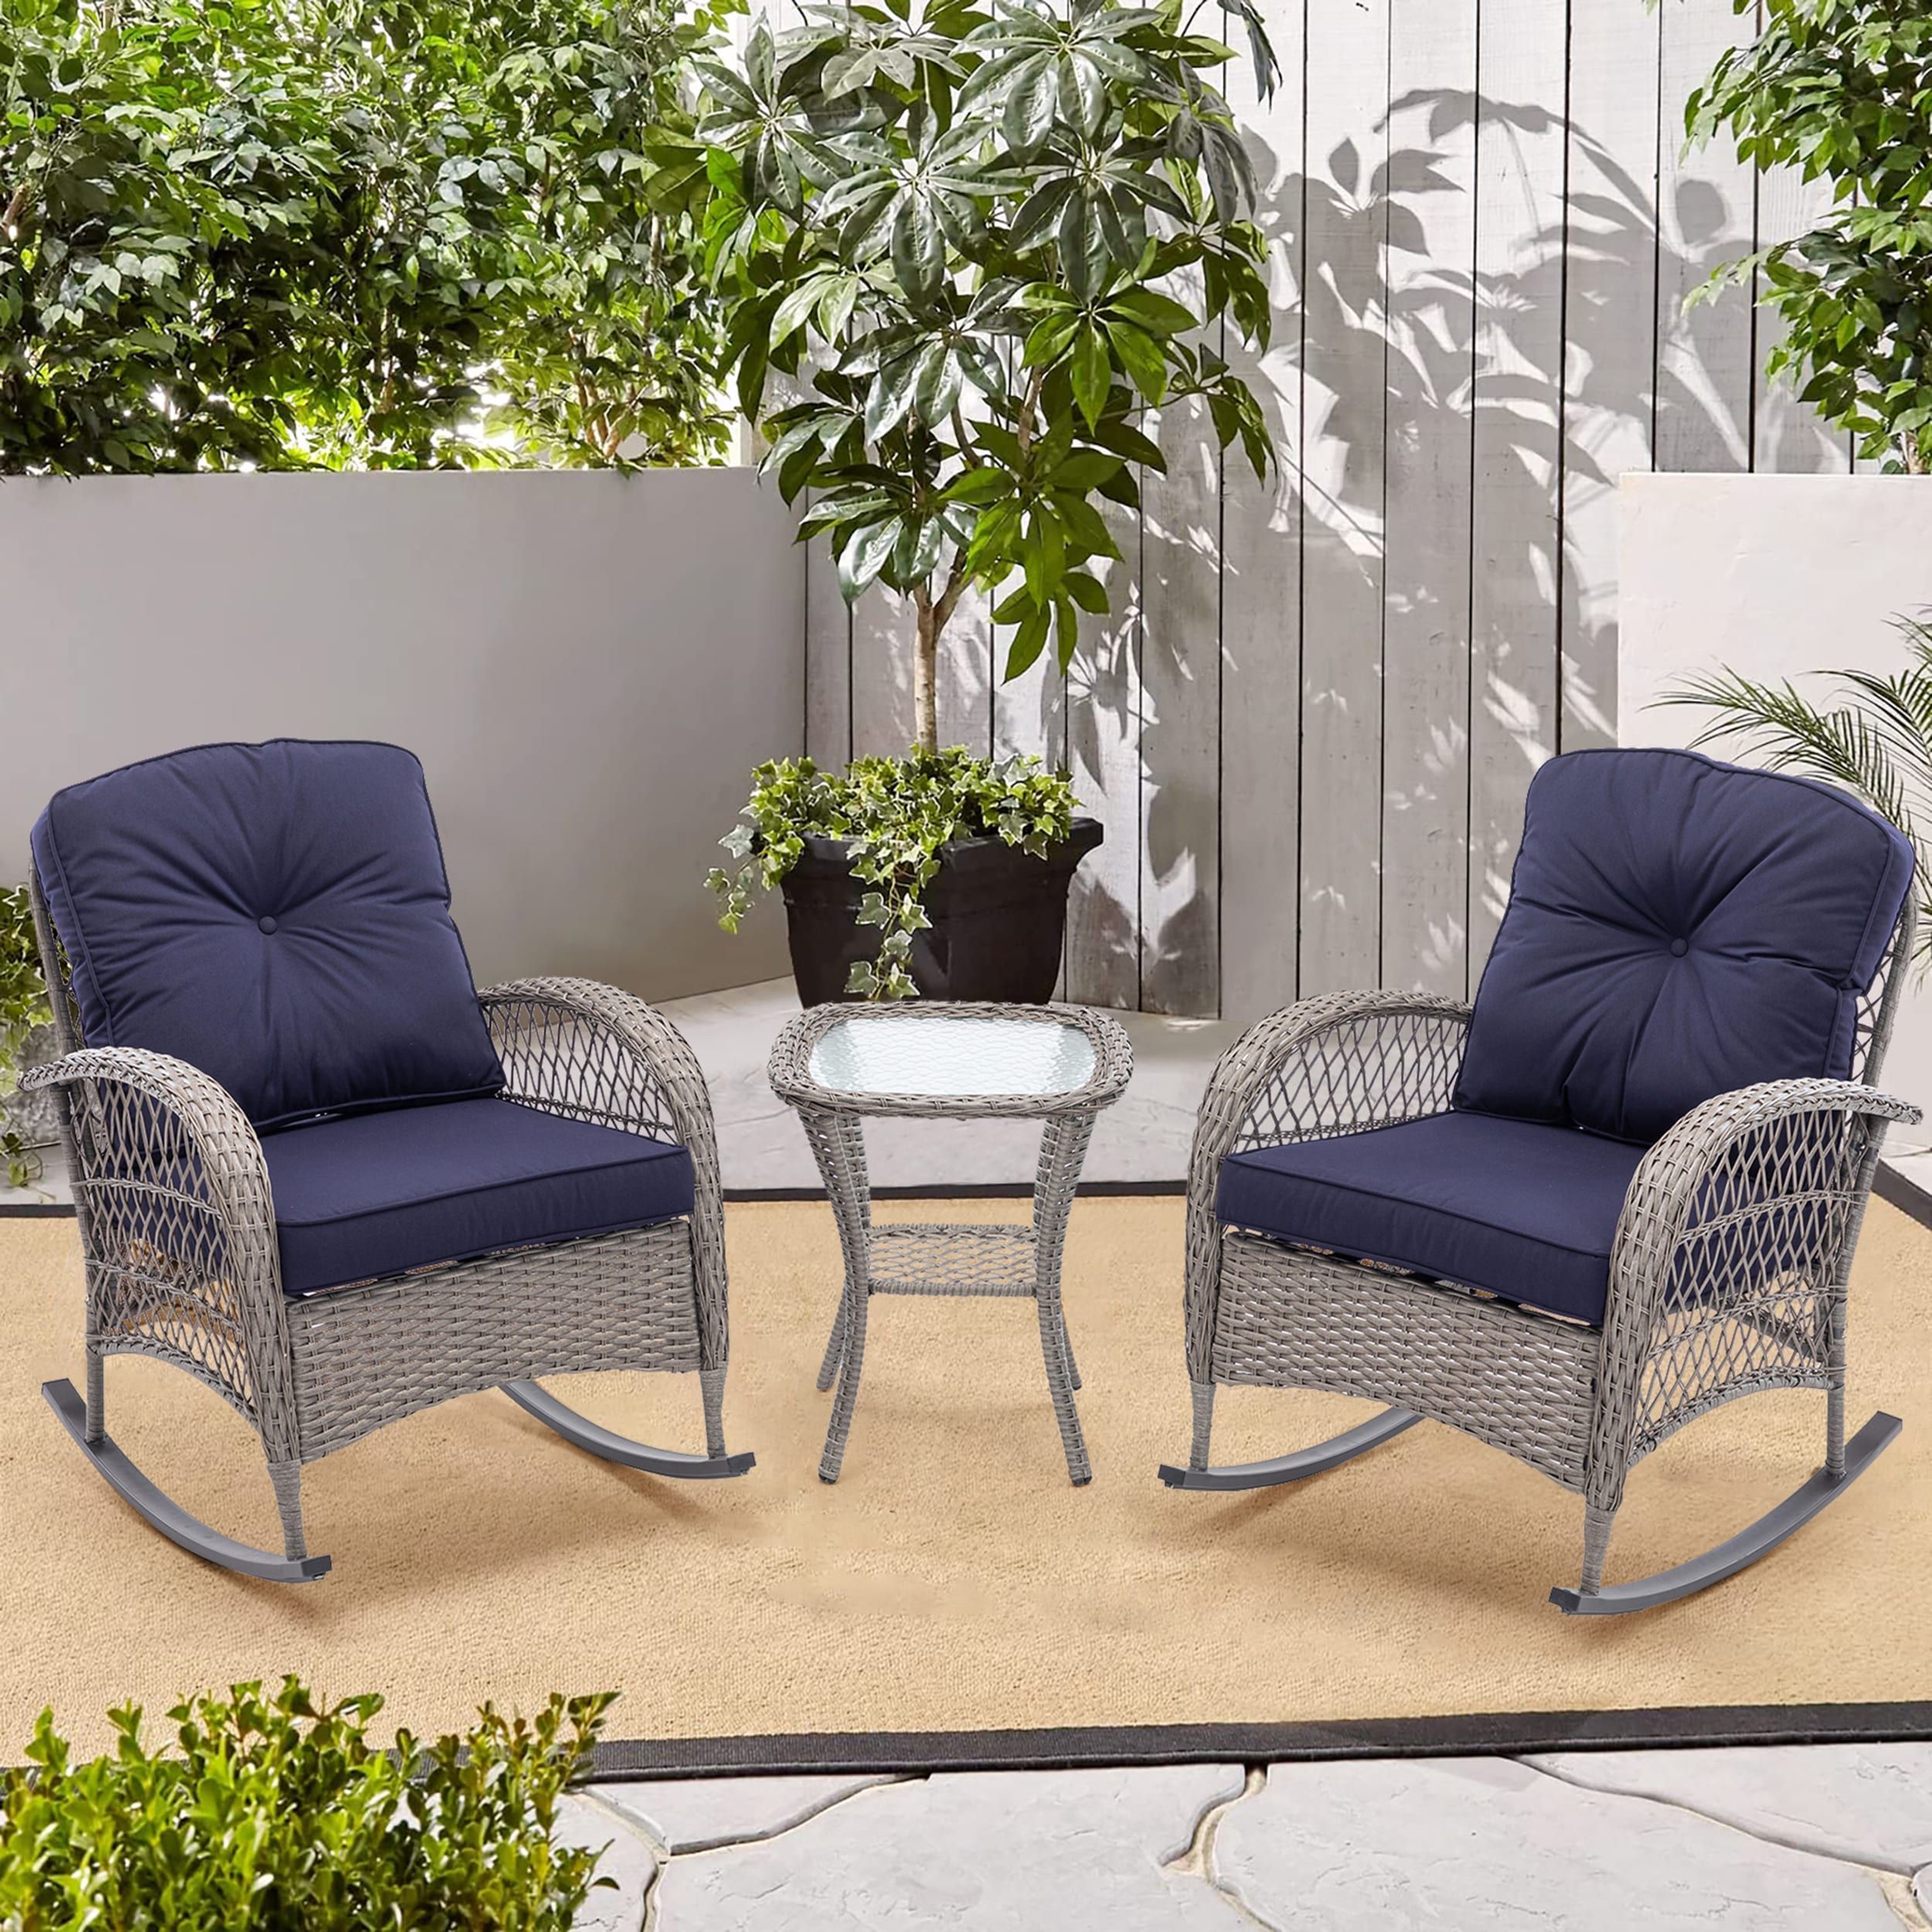 Clihome Wicker Rocking Chair Set 3 Piece Wicker Patio Conversation Set With  Blue Cushions In The Patio Conversation Sets Department At Lowes Inside 3 Piece Cushion Rocking Chair Set (View 3 of 15)